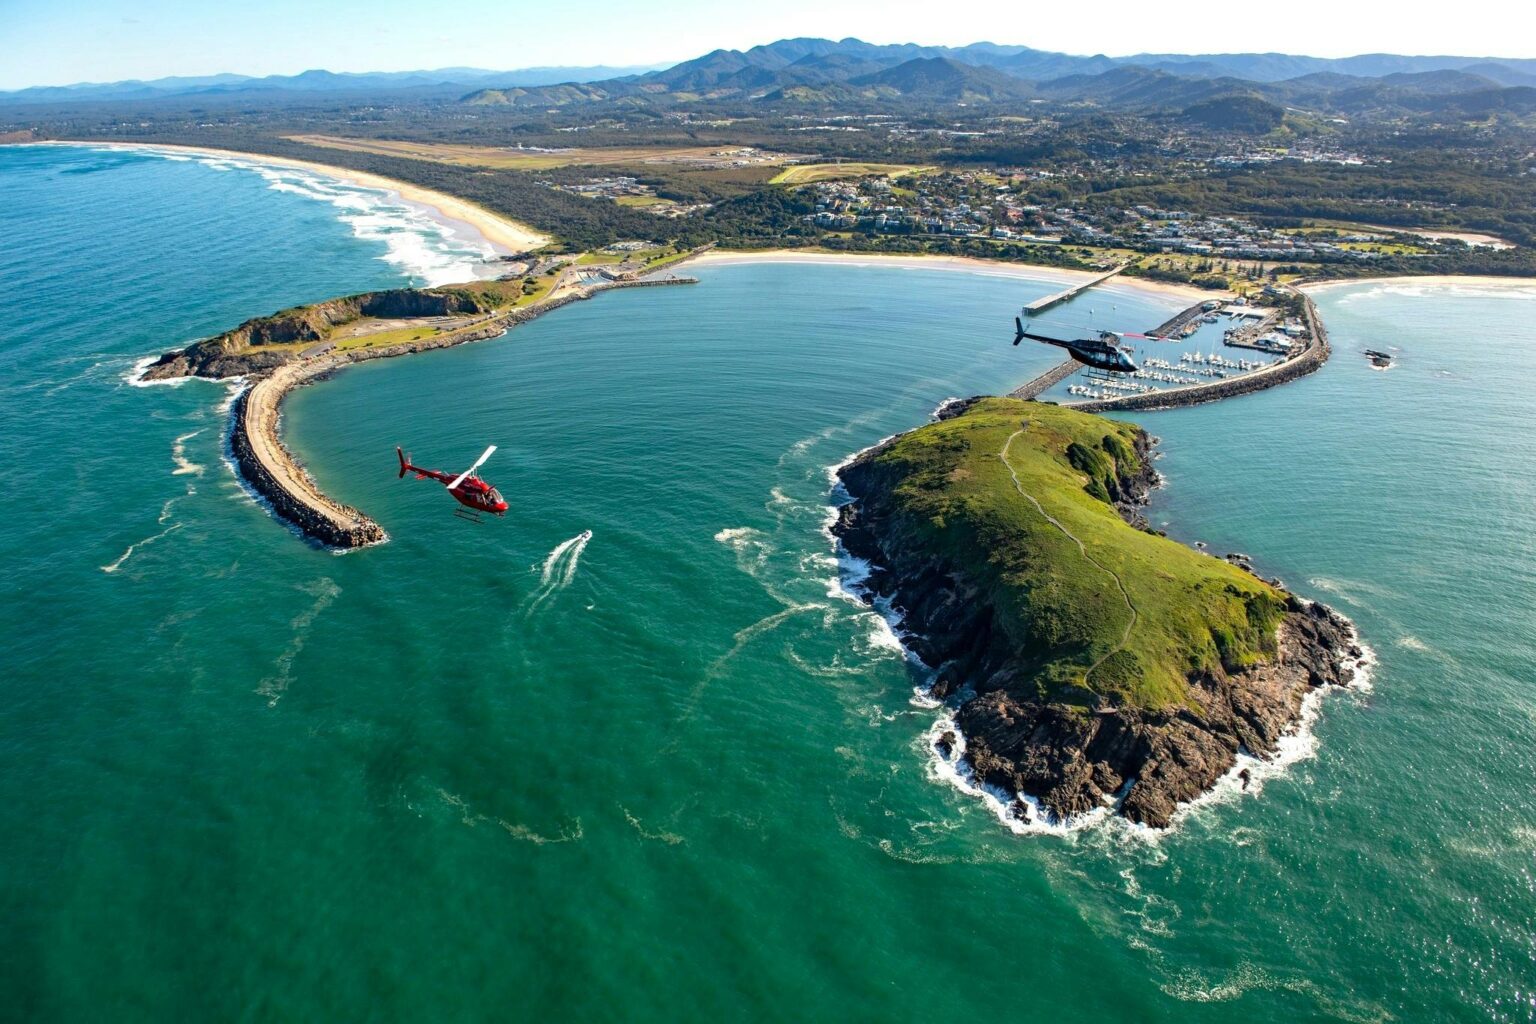 Coffs Harbour with the harbour,  Muttonbird Island and two scenic helicopters in view